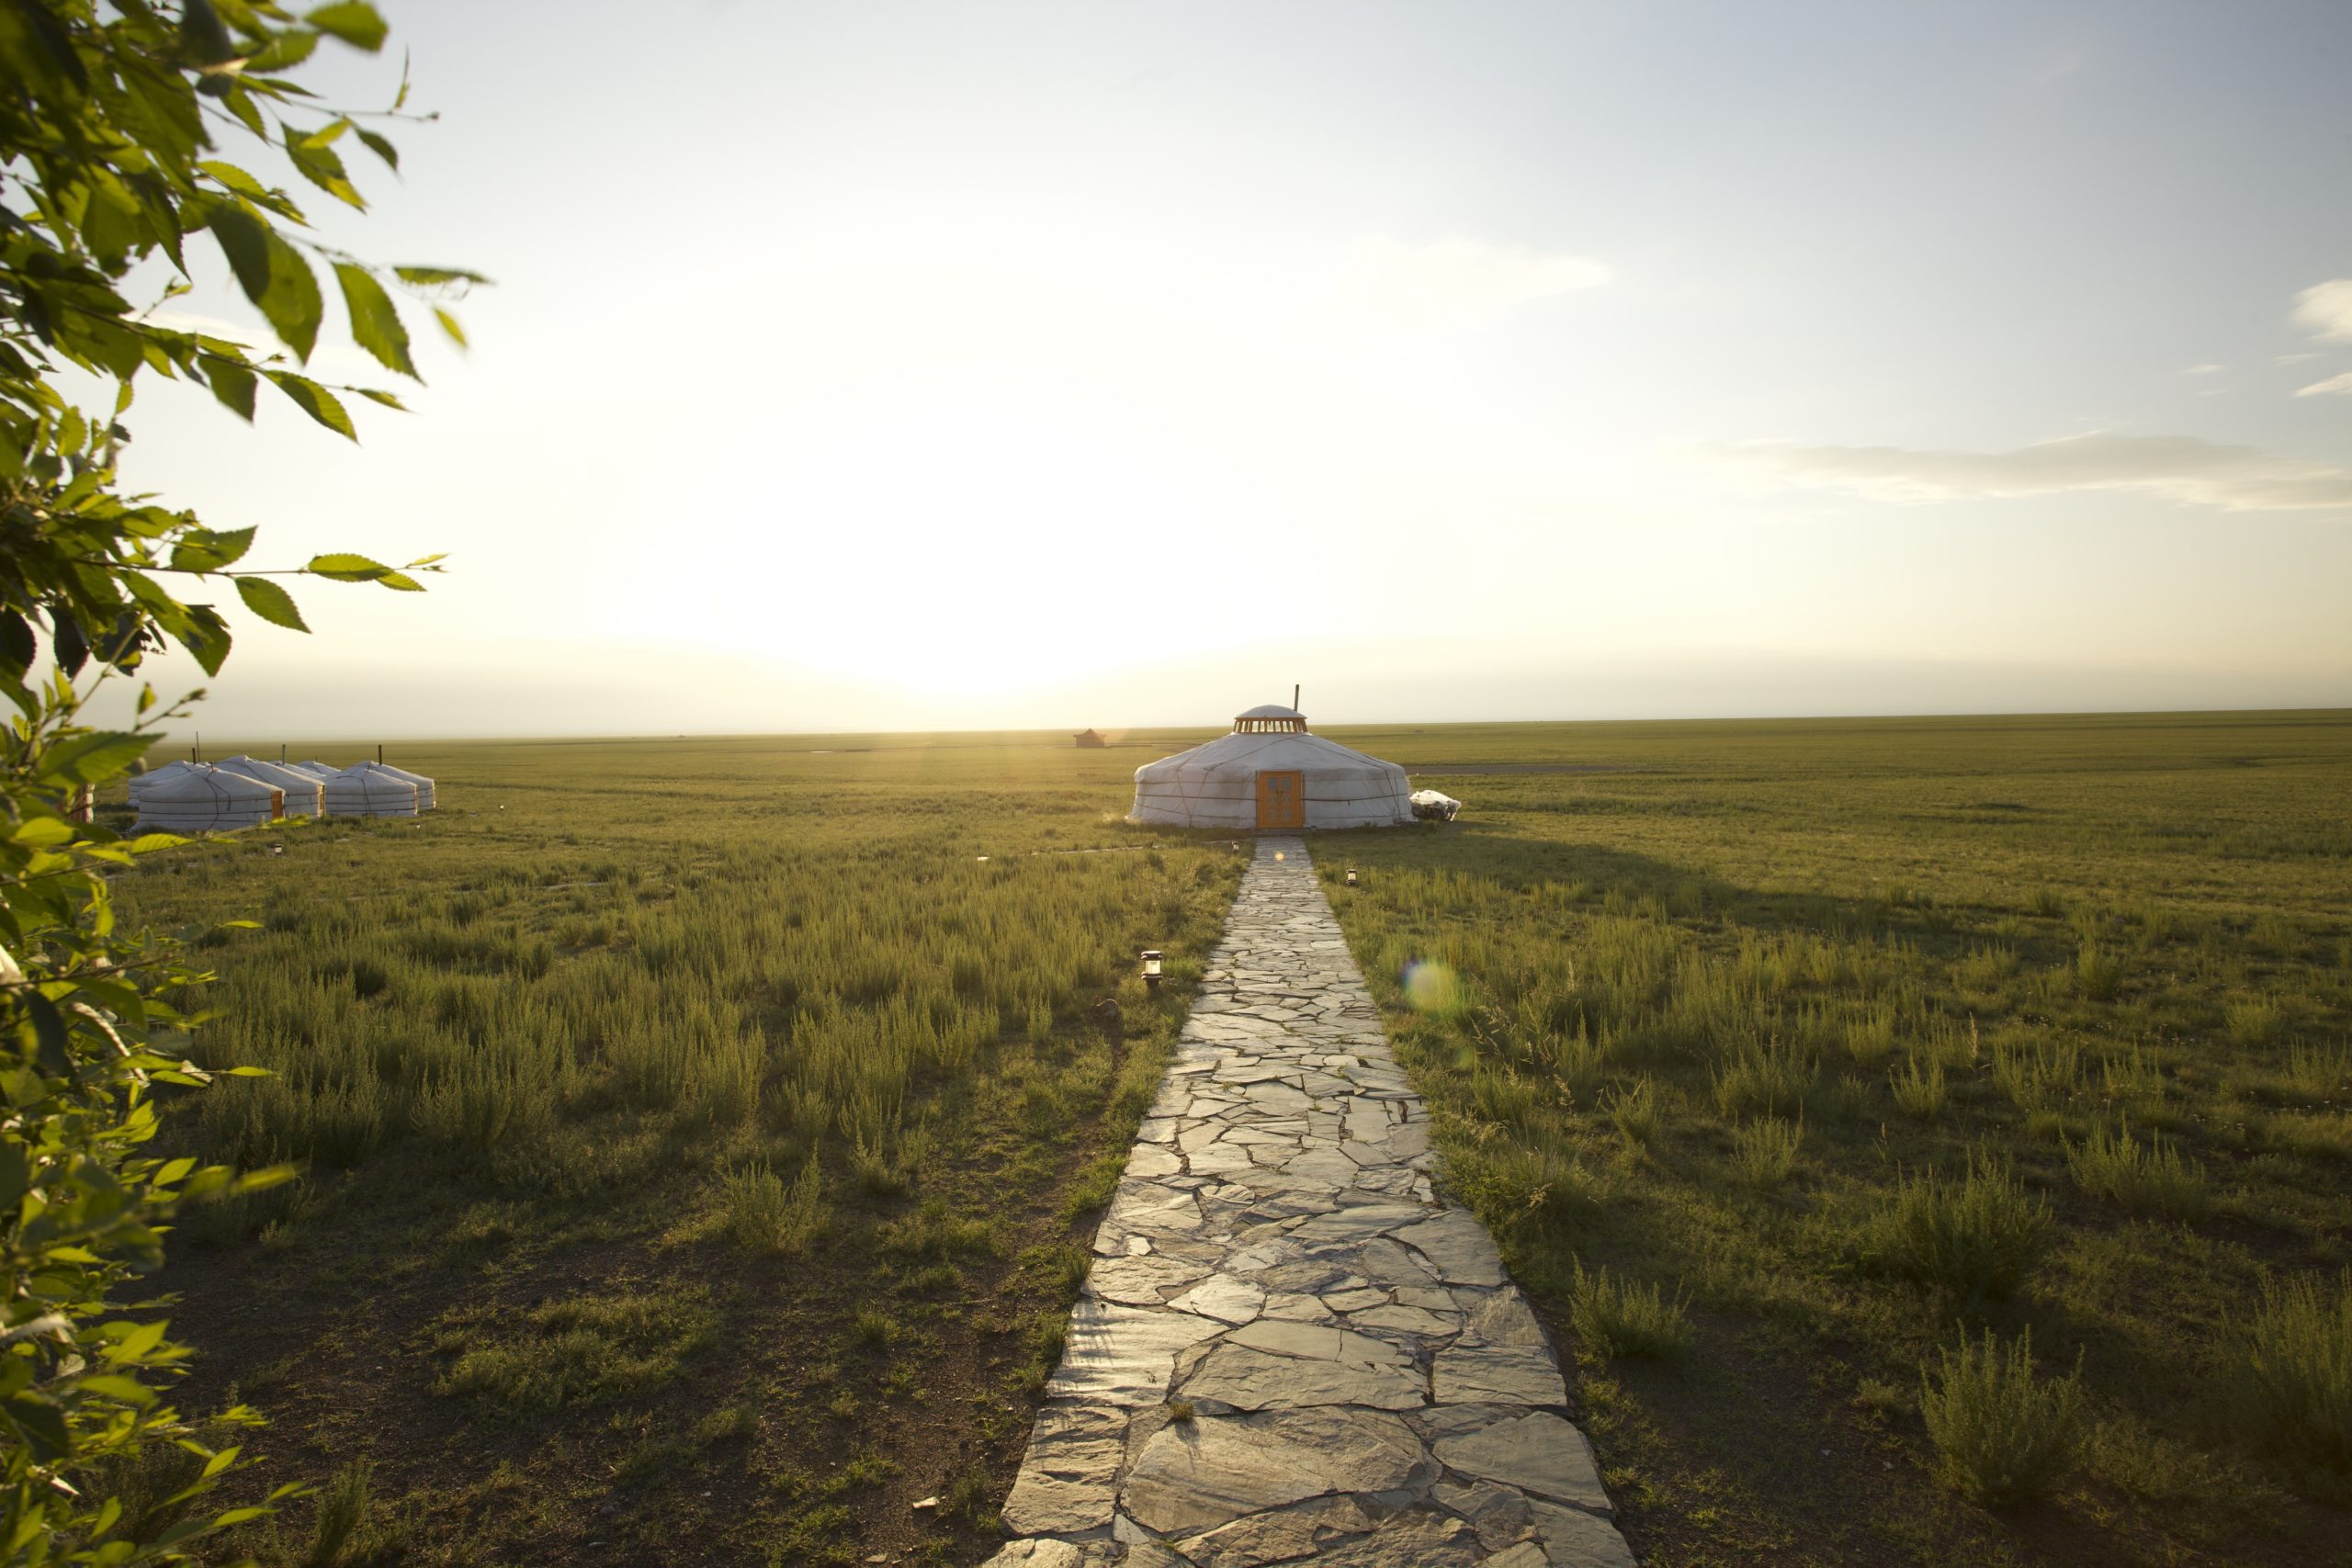 Best COVID Travel Destinations 2022: 10 Reasons Mongolia Is Top of the List